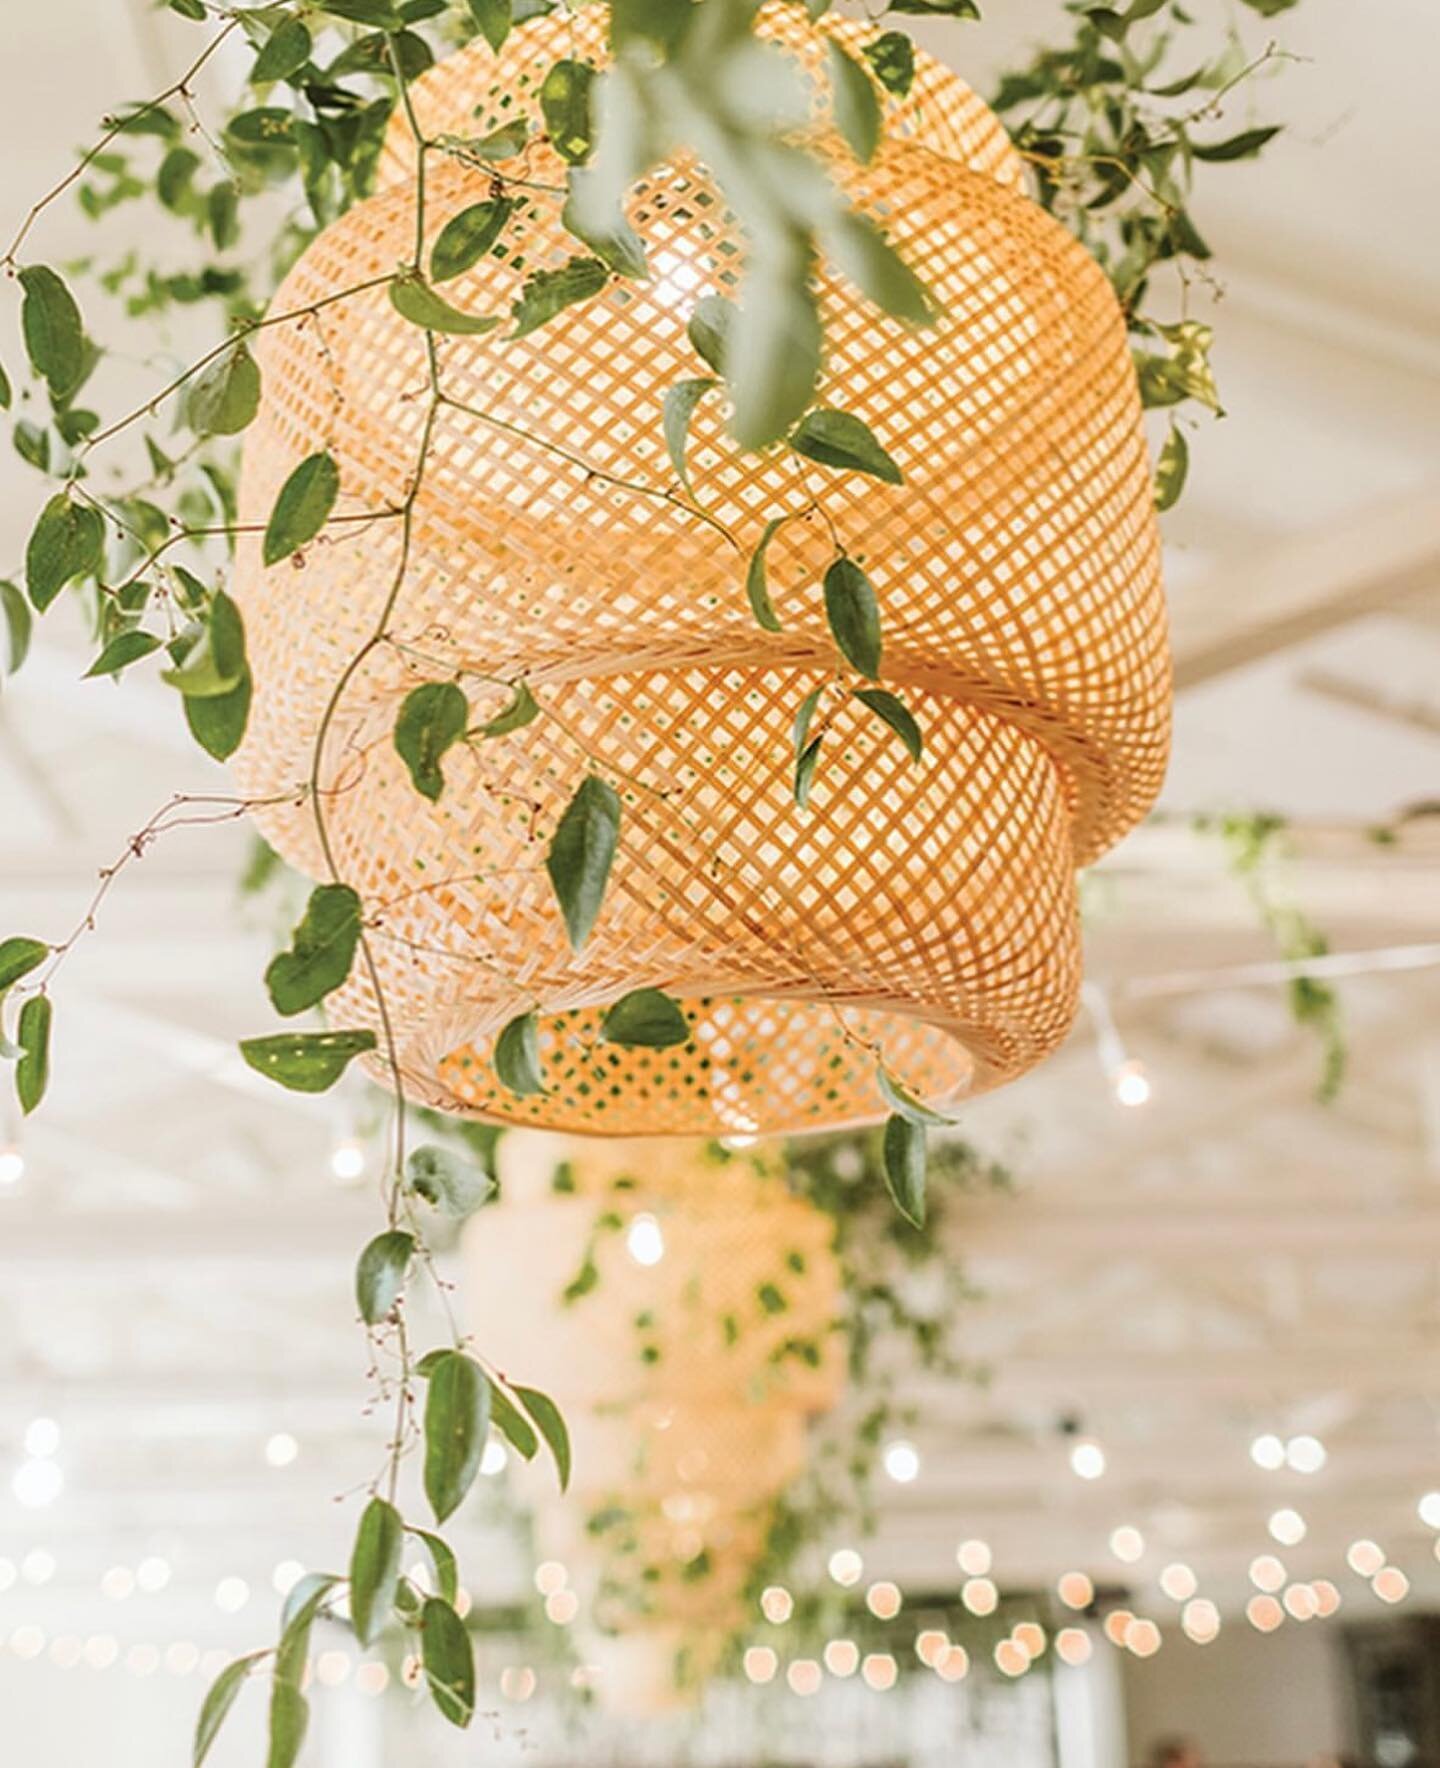 Cara &amp; Cameron did the island right with simple elegance ❤️🌿One of our most favorite weddings of 2022! A stunning aerial space envisioned by the incredible @camasdesigns featuring our classic rattan pendants. Cheers to ⭐️ vendors and planners 🫶